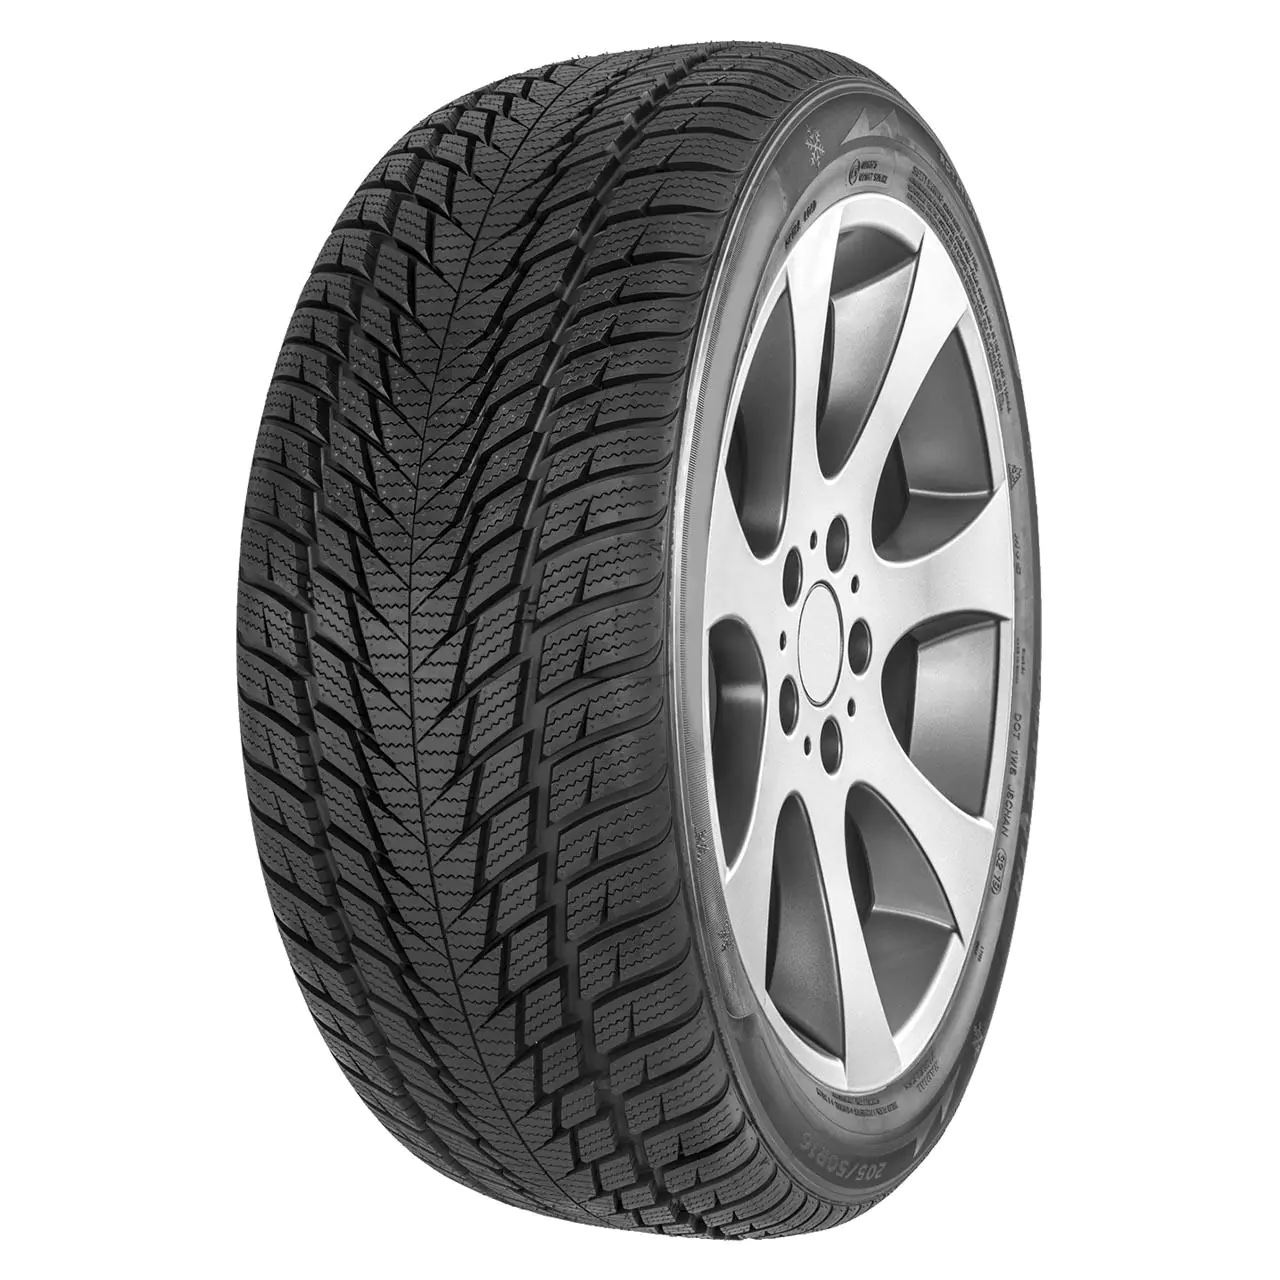 Gomme Autovettura Fortuna 255/45 R19 104V GOWIN UHP3 XL M+S Invernale